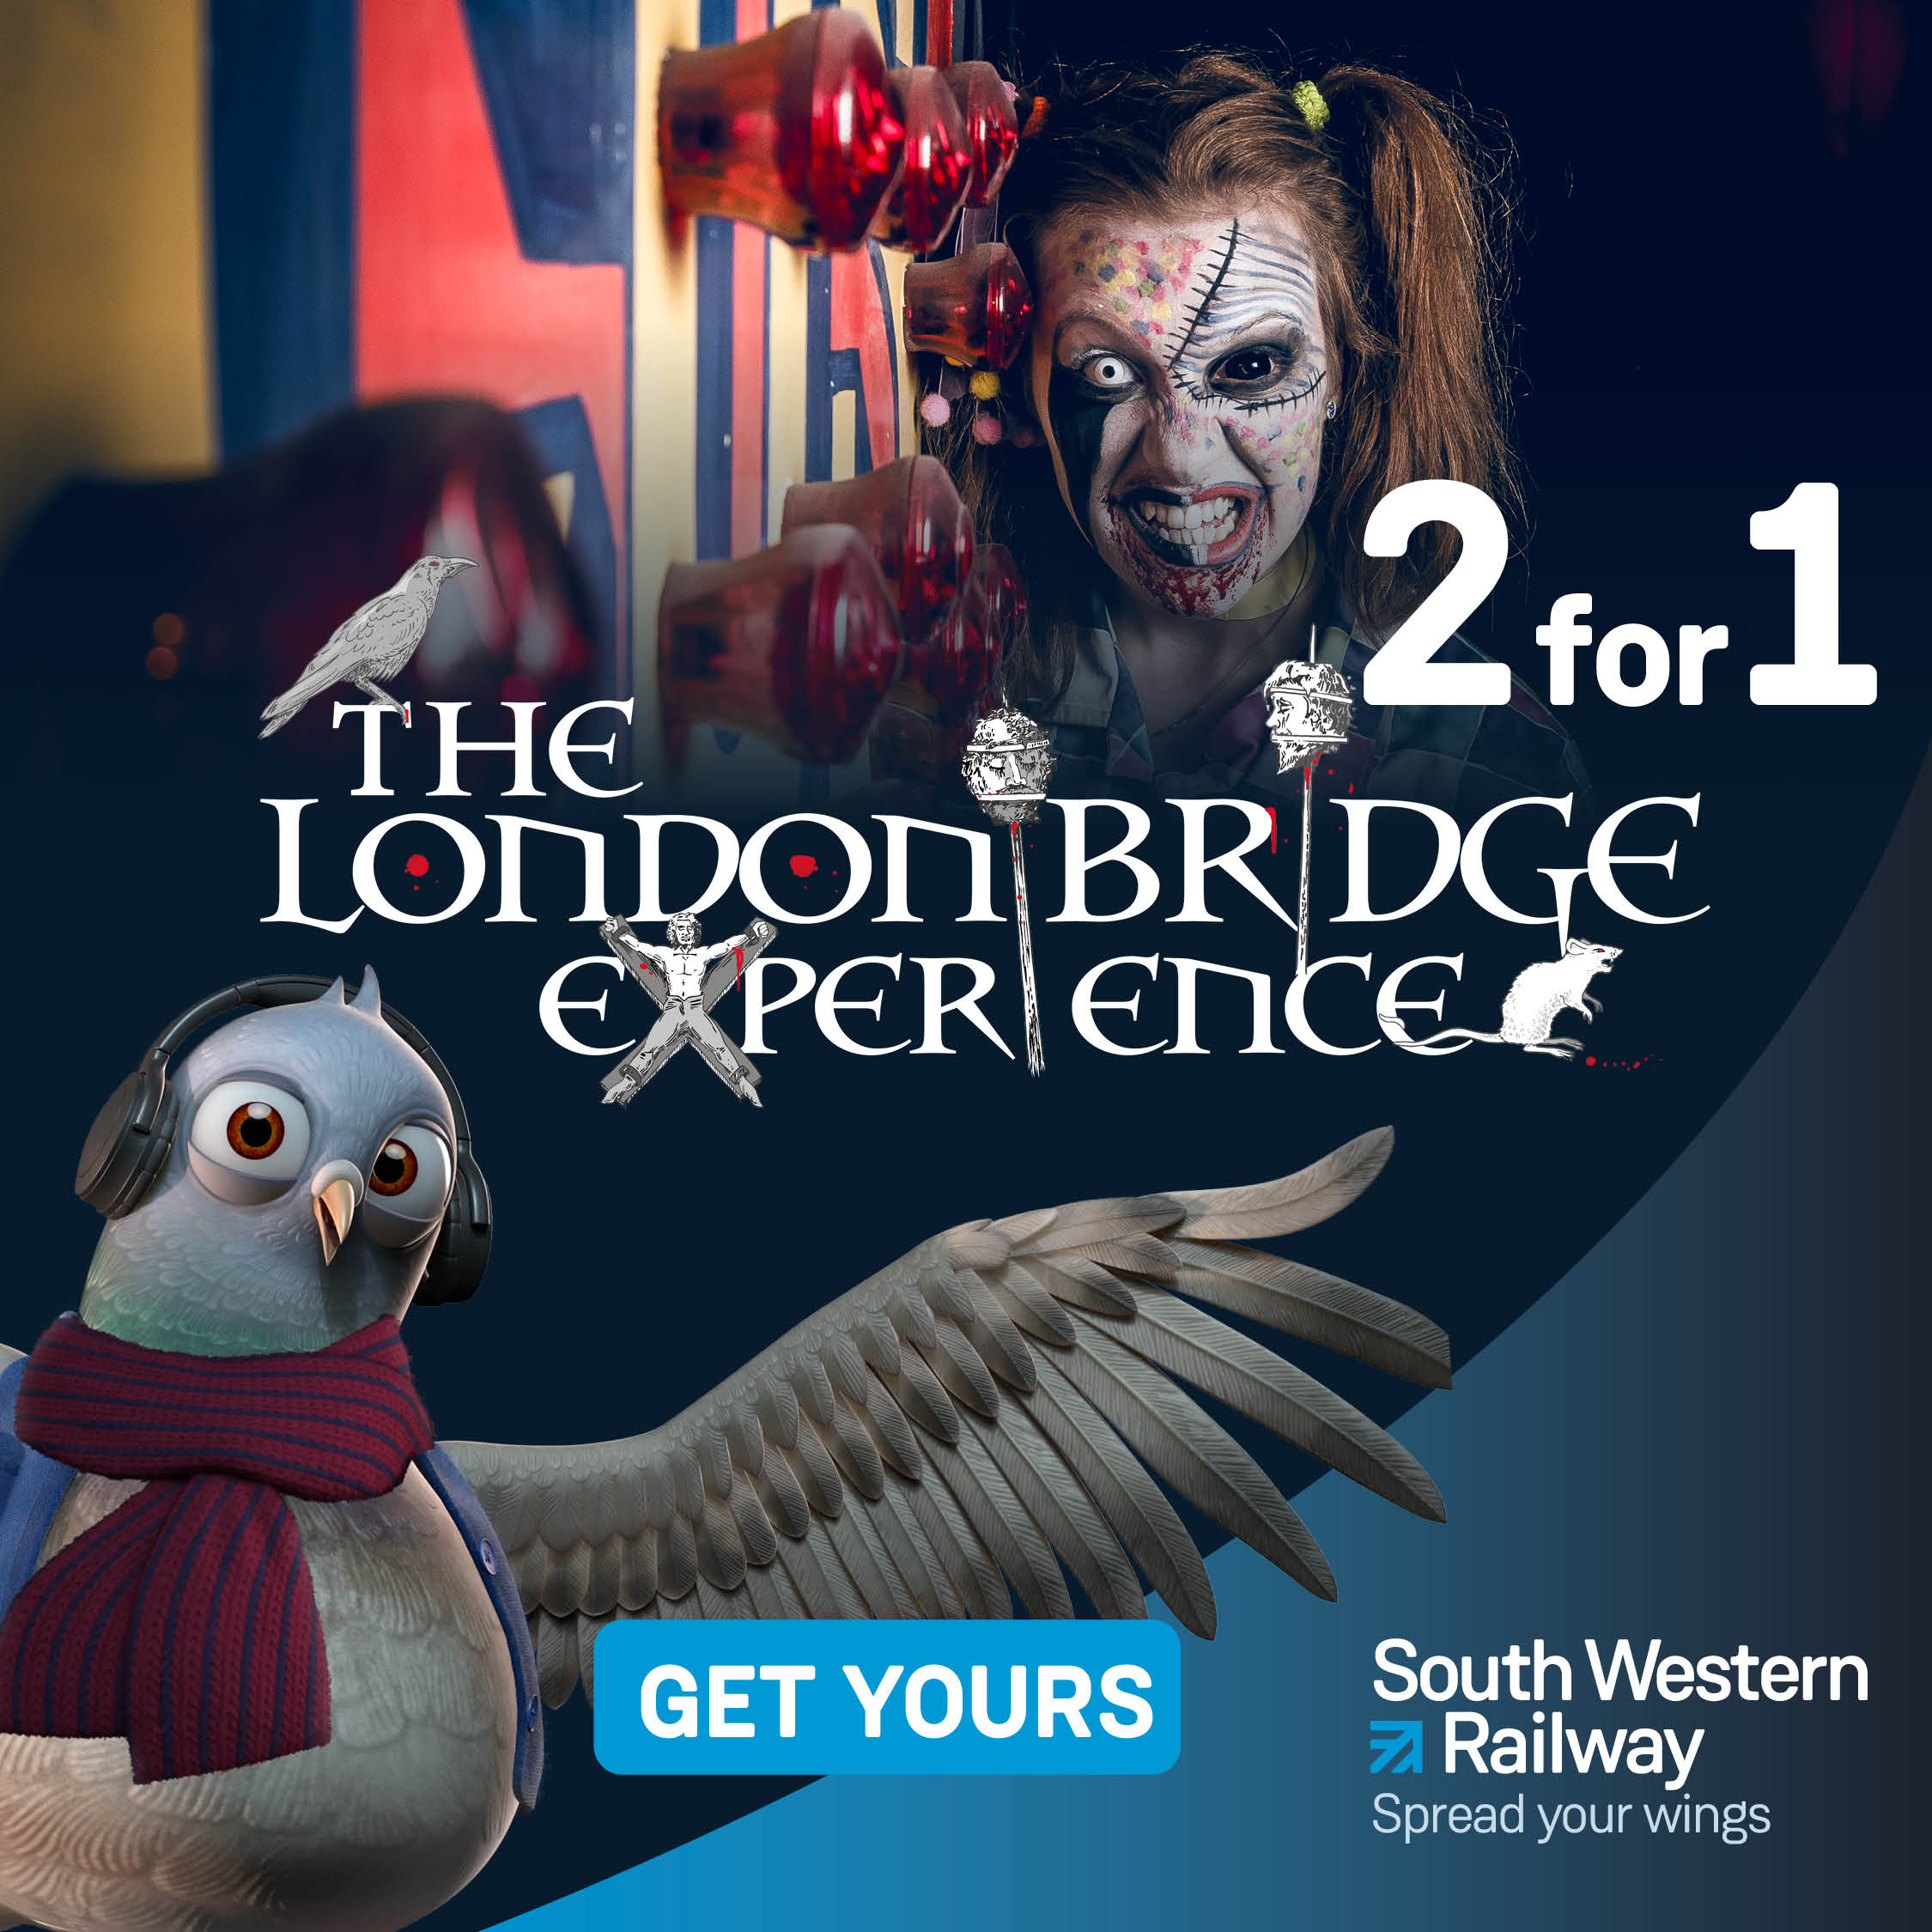 2 for 1 entry to The London Bridge Experience with SWR Rewards from South Western Railway